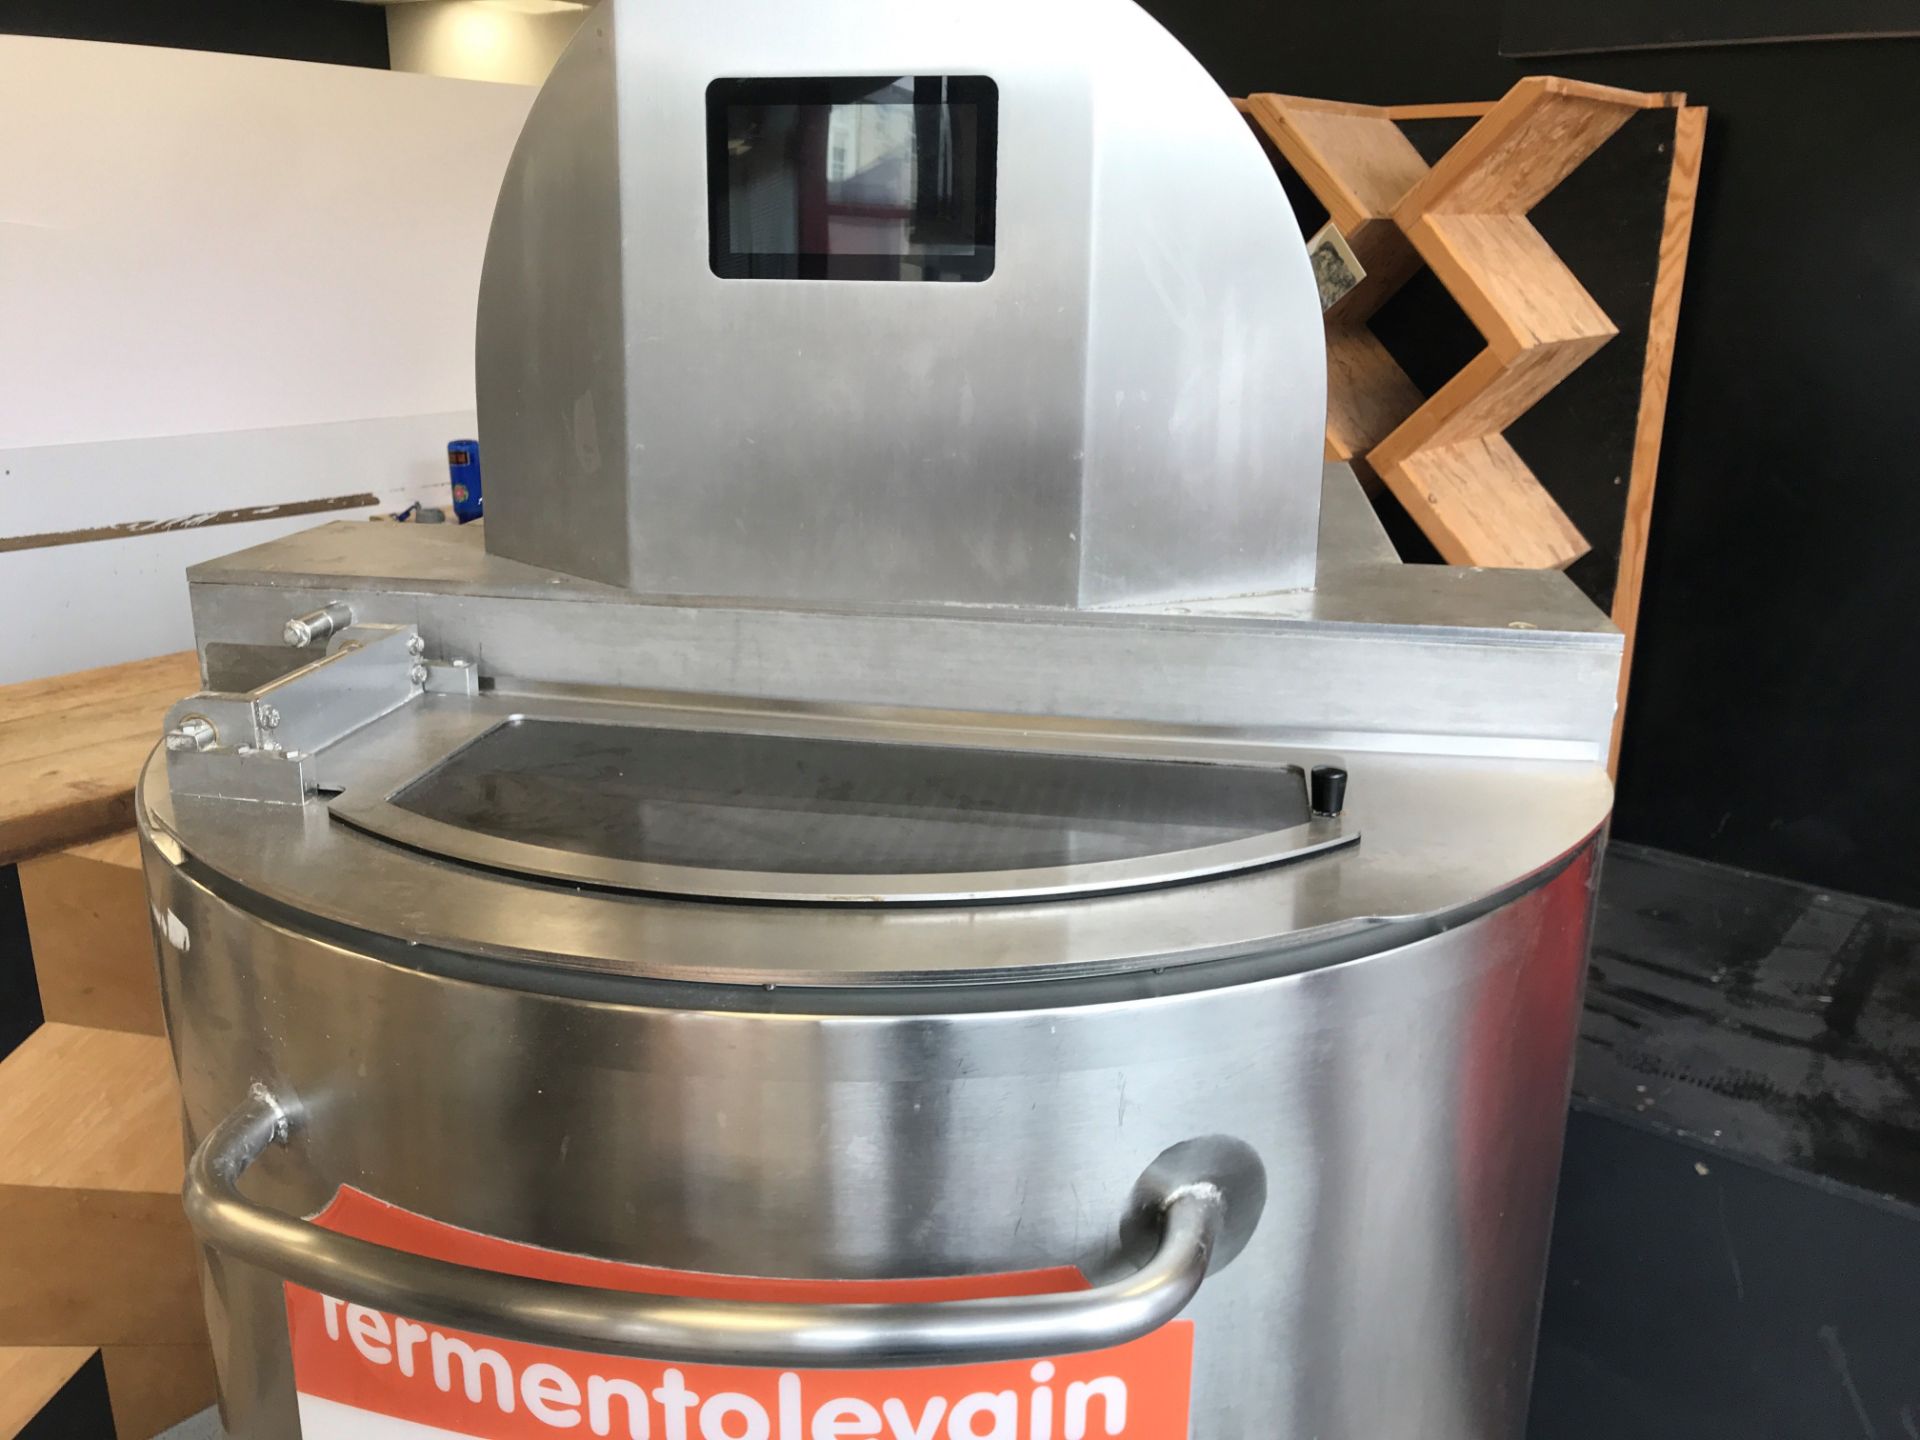 Bertrand-Puma Fermentolevian FL200 with weighing option - Image 2 of 5